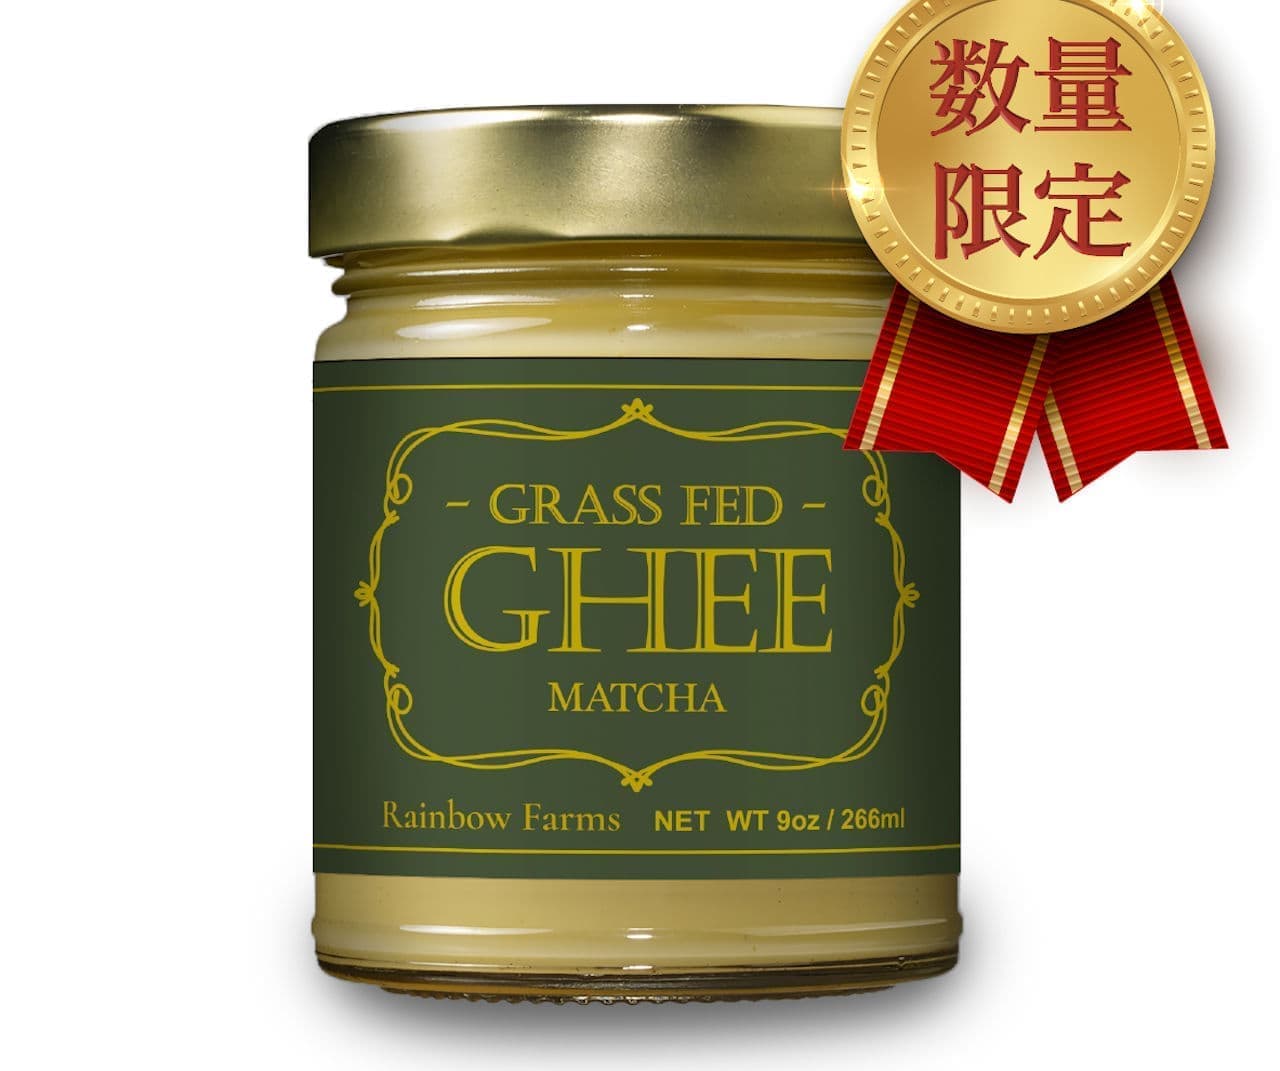 From "Matcha / Gee Butter" Rainbow Farms